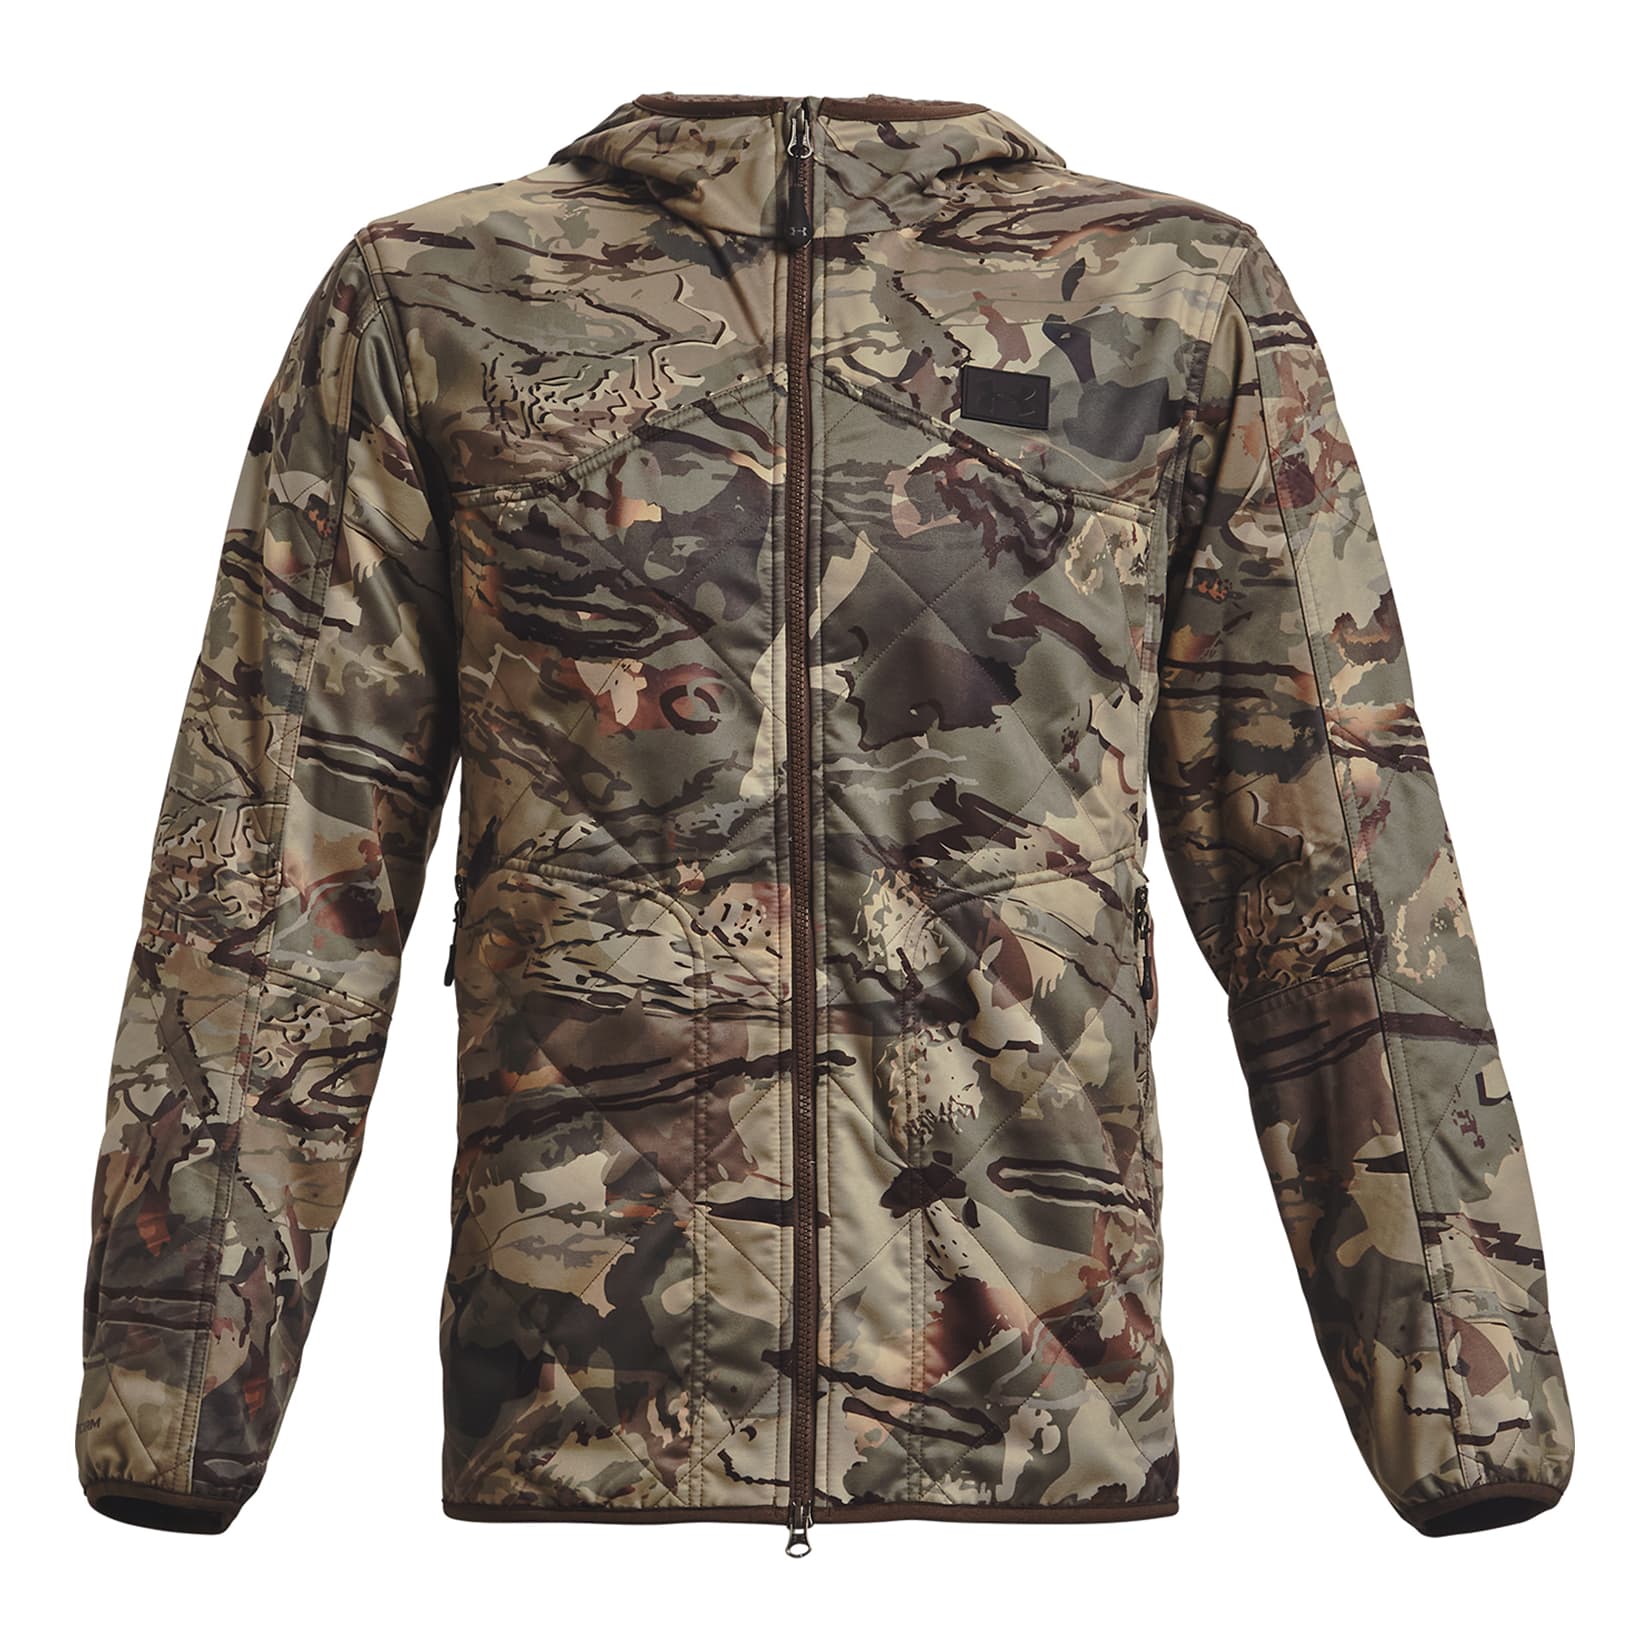 Under Armour® Men’s Brow Tine ColdGear® Infrared Jacket - Forest Camo/Black